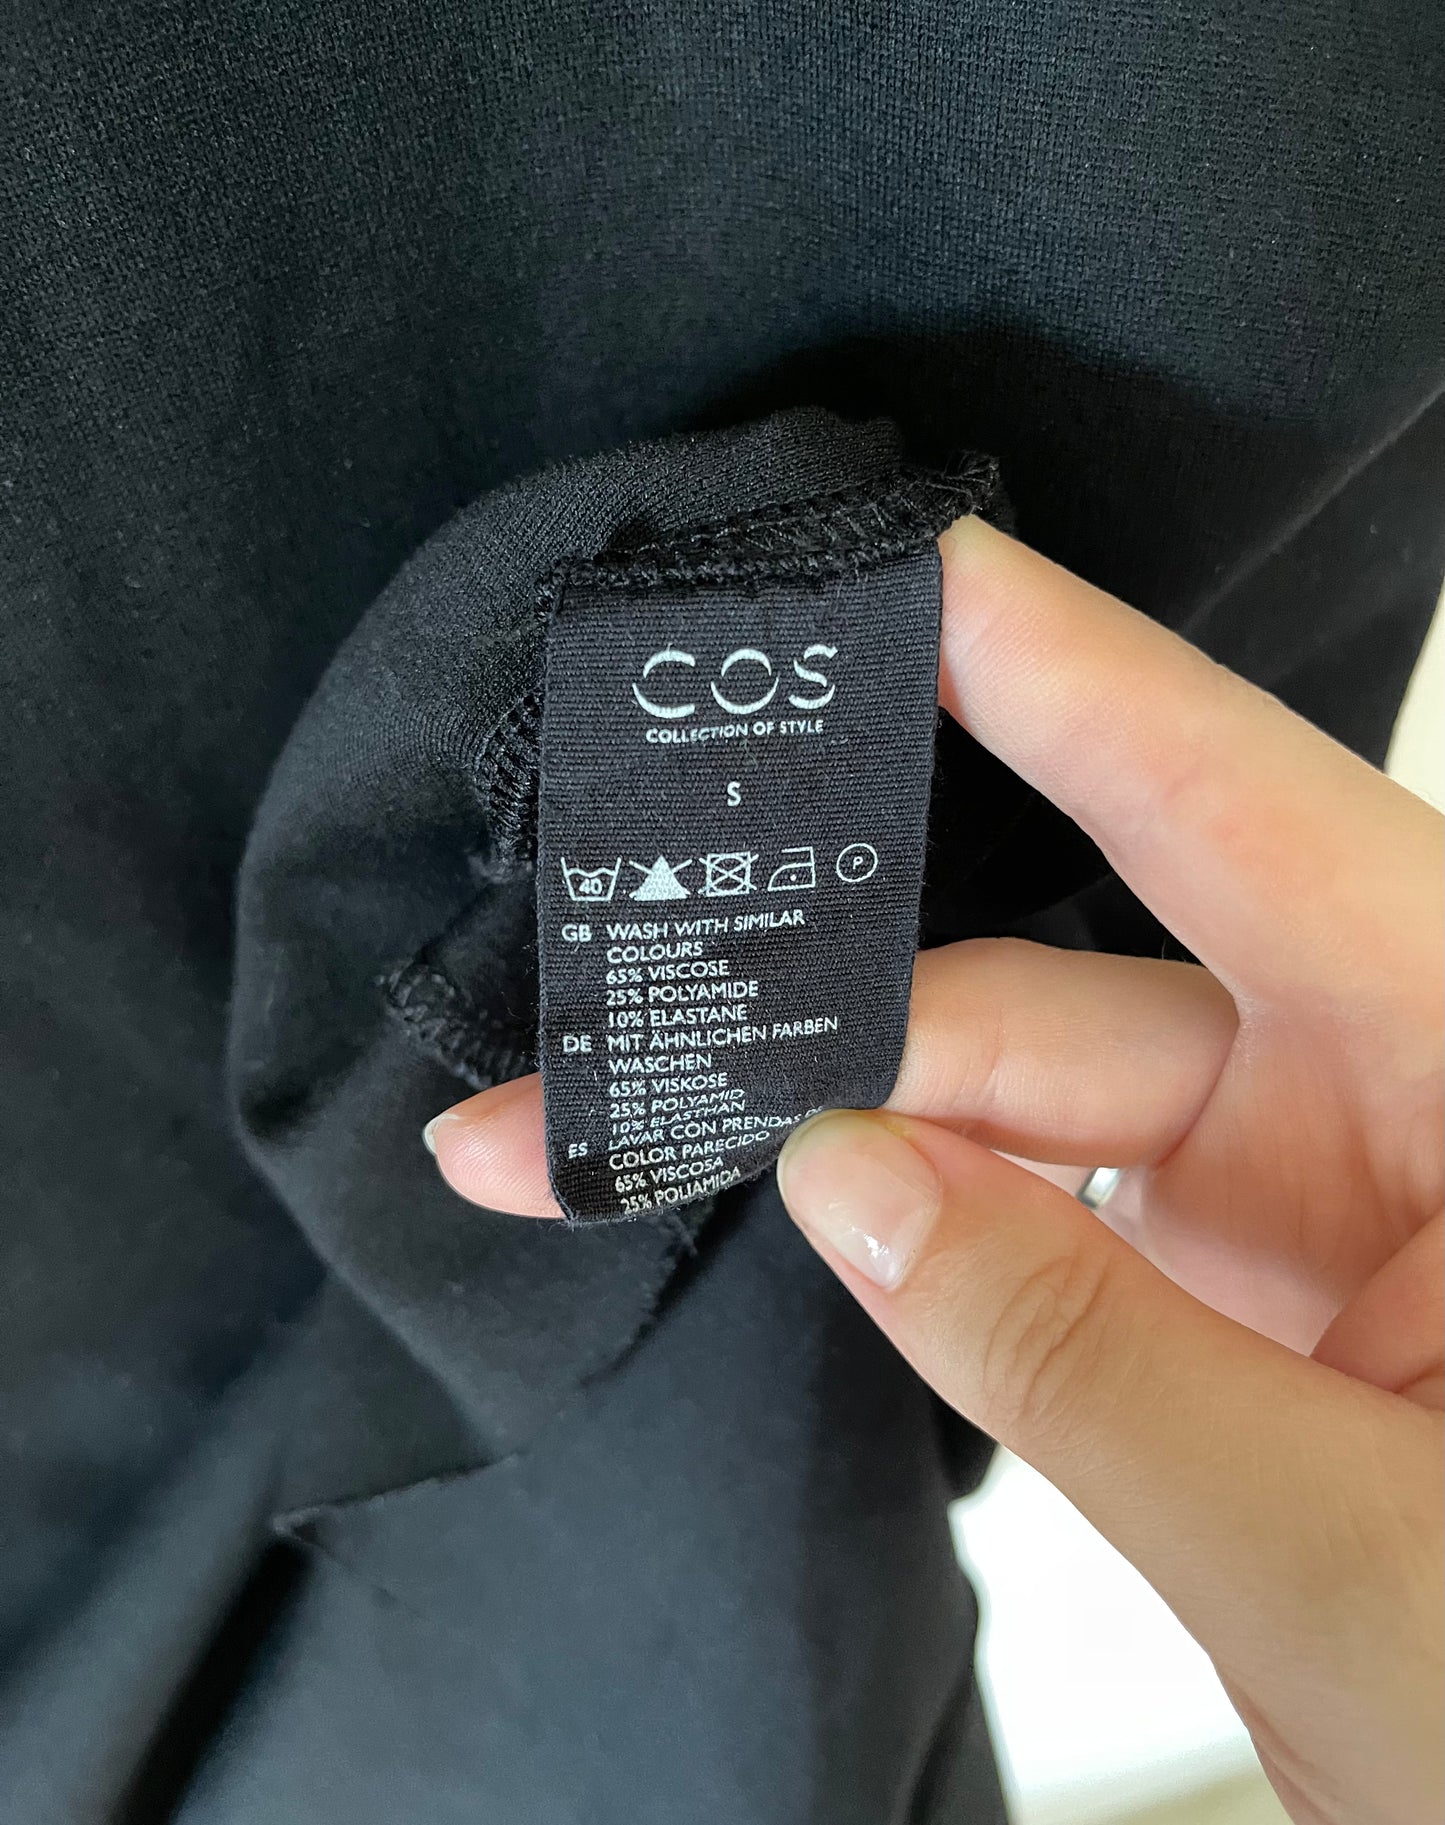 Gorgeous mini black dress from COS